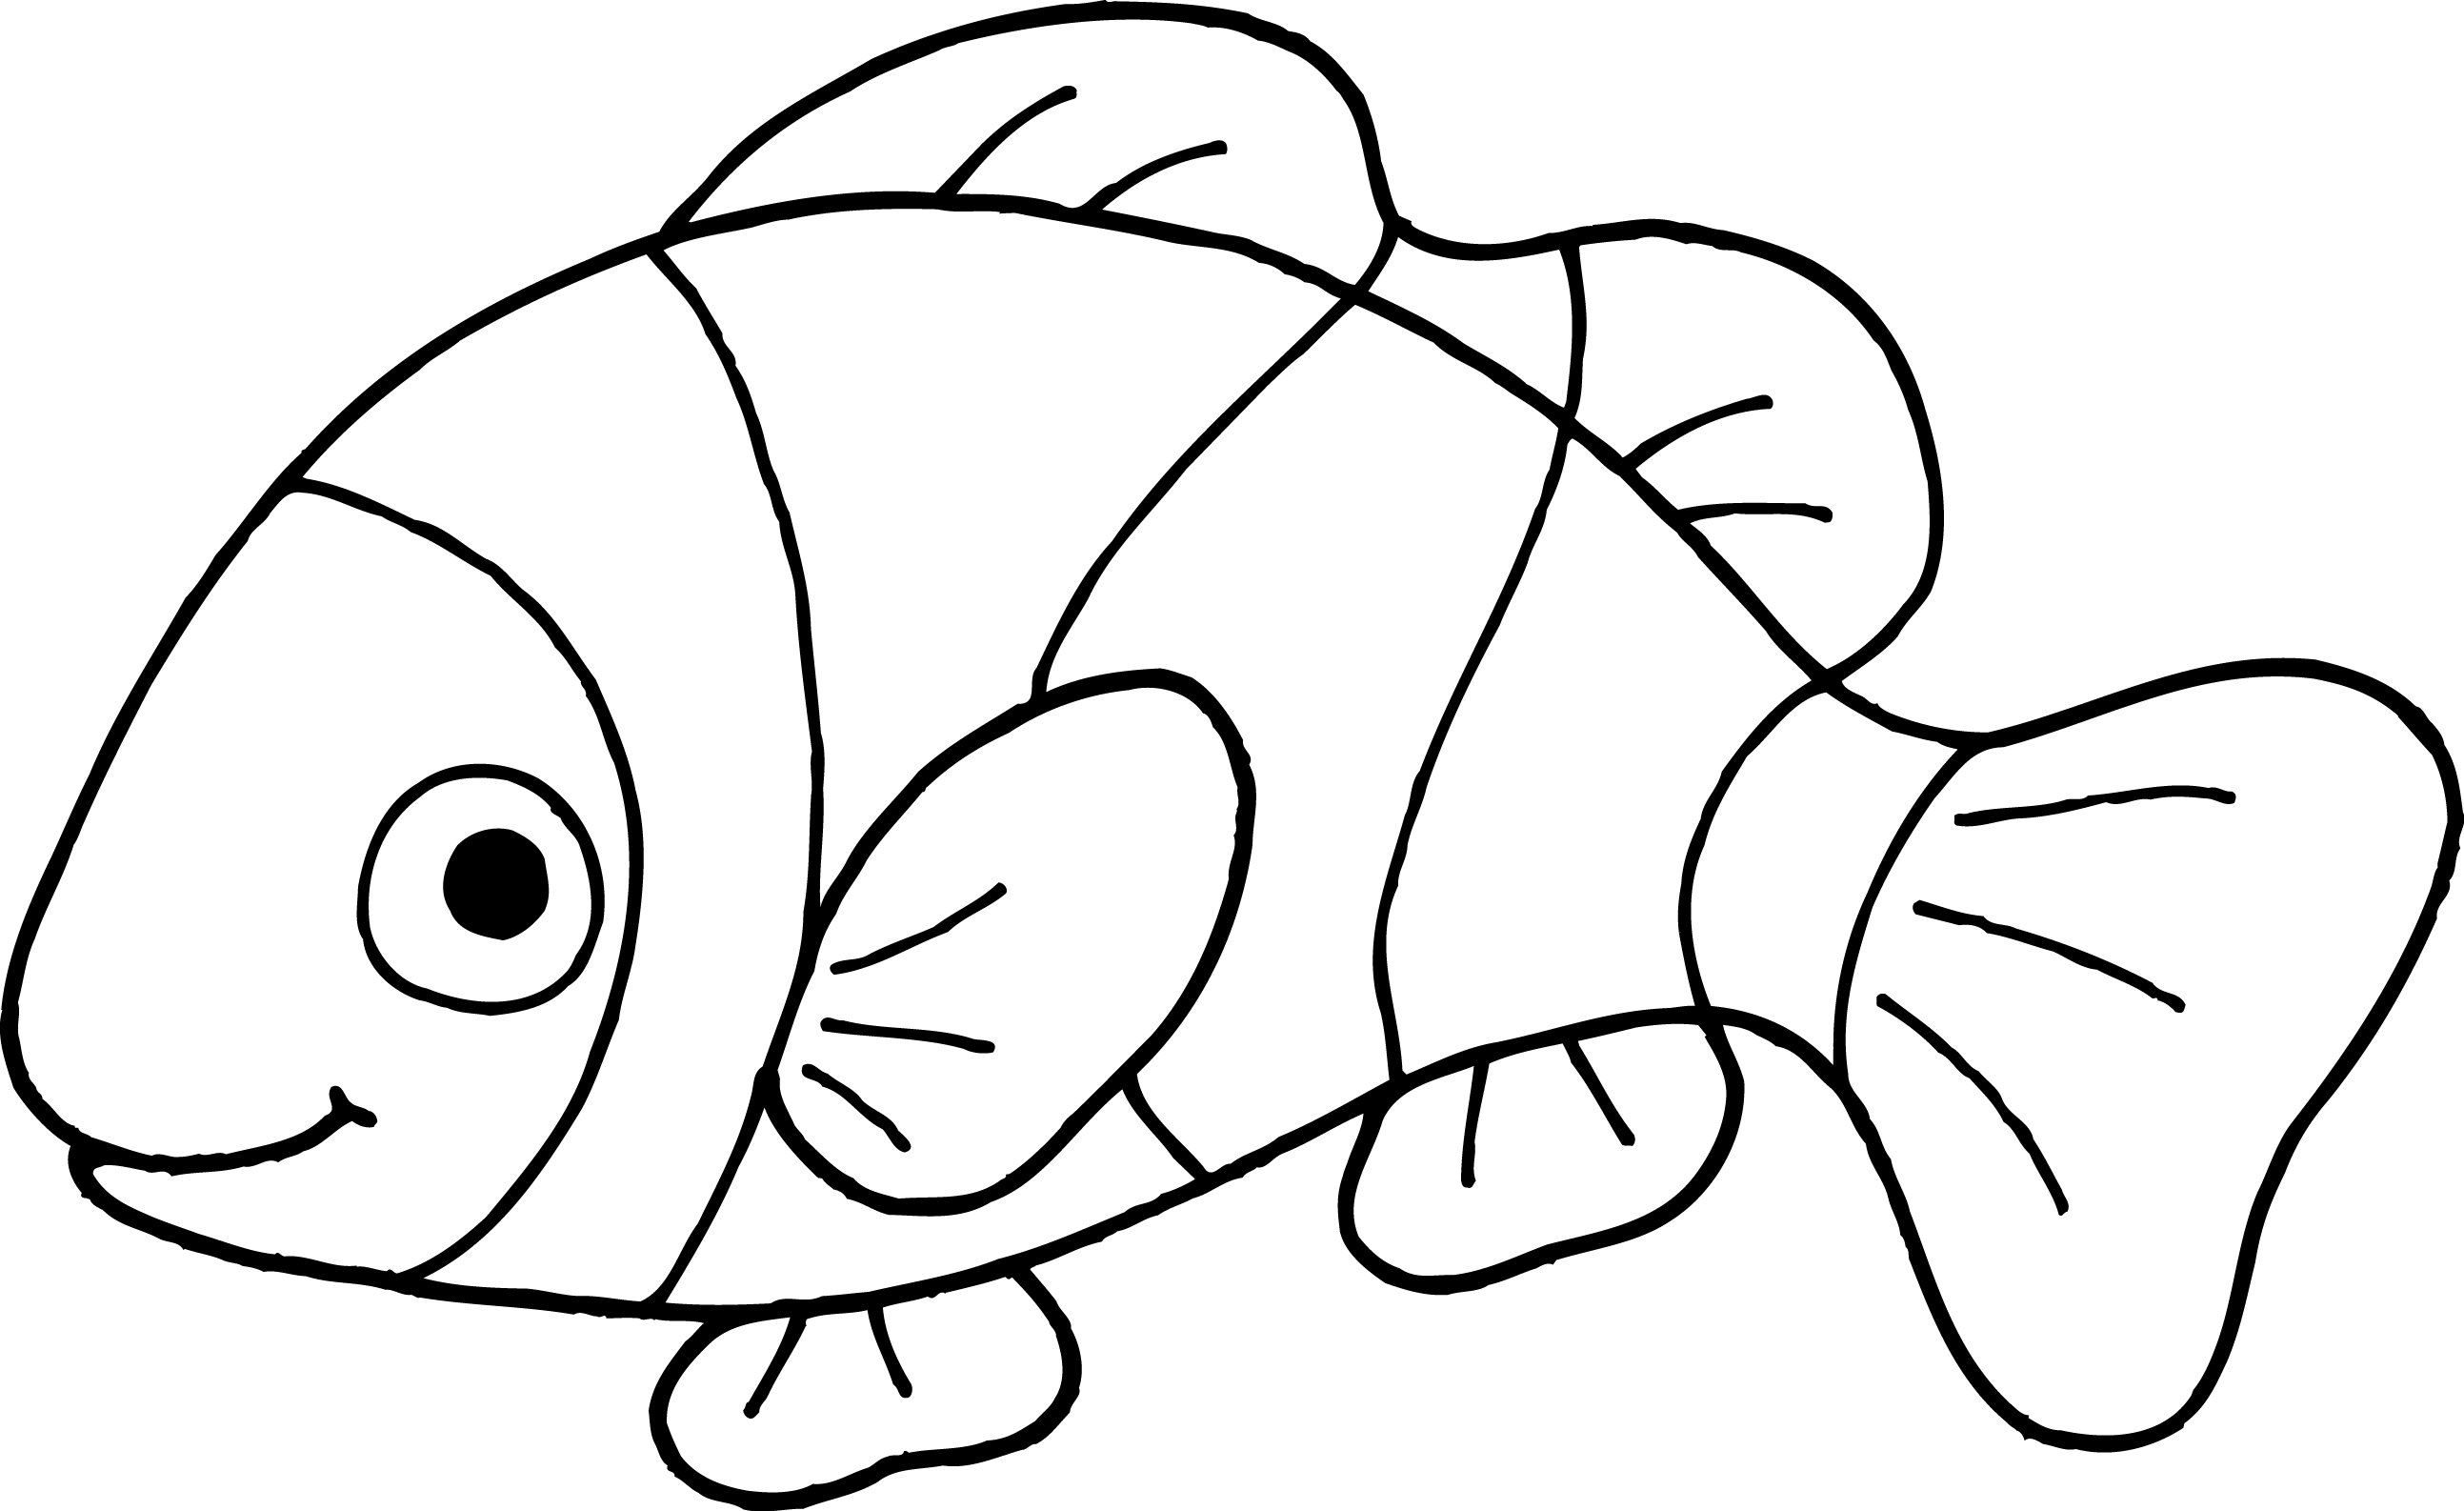 Tropical fish clipart black and white